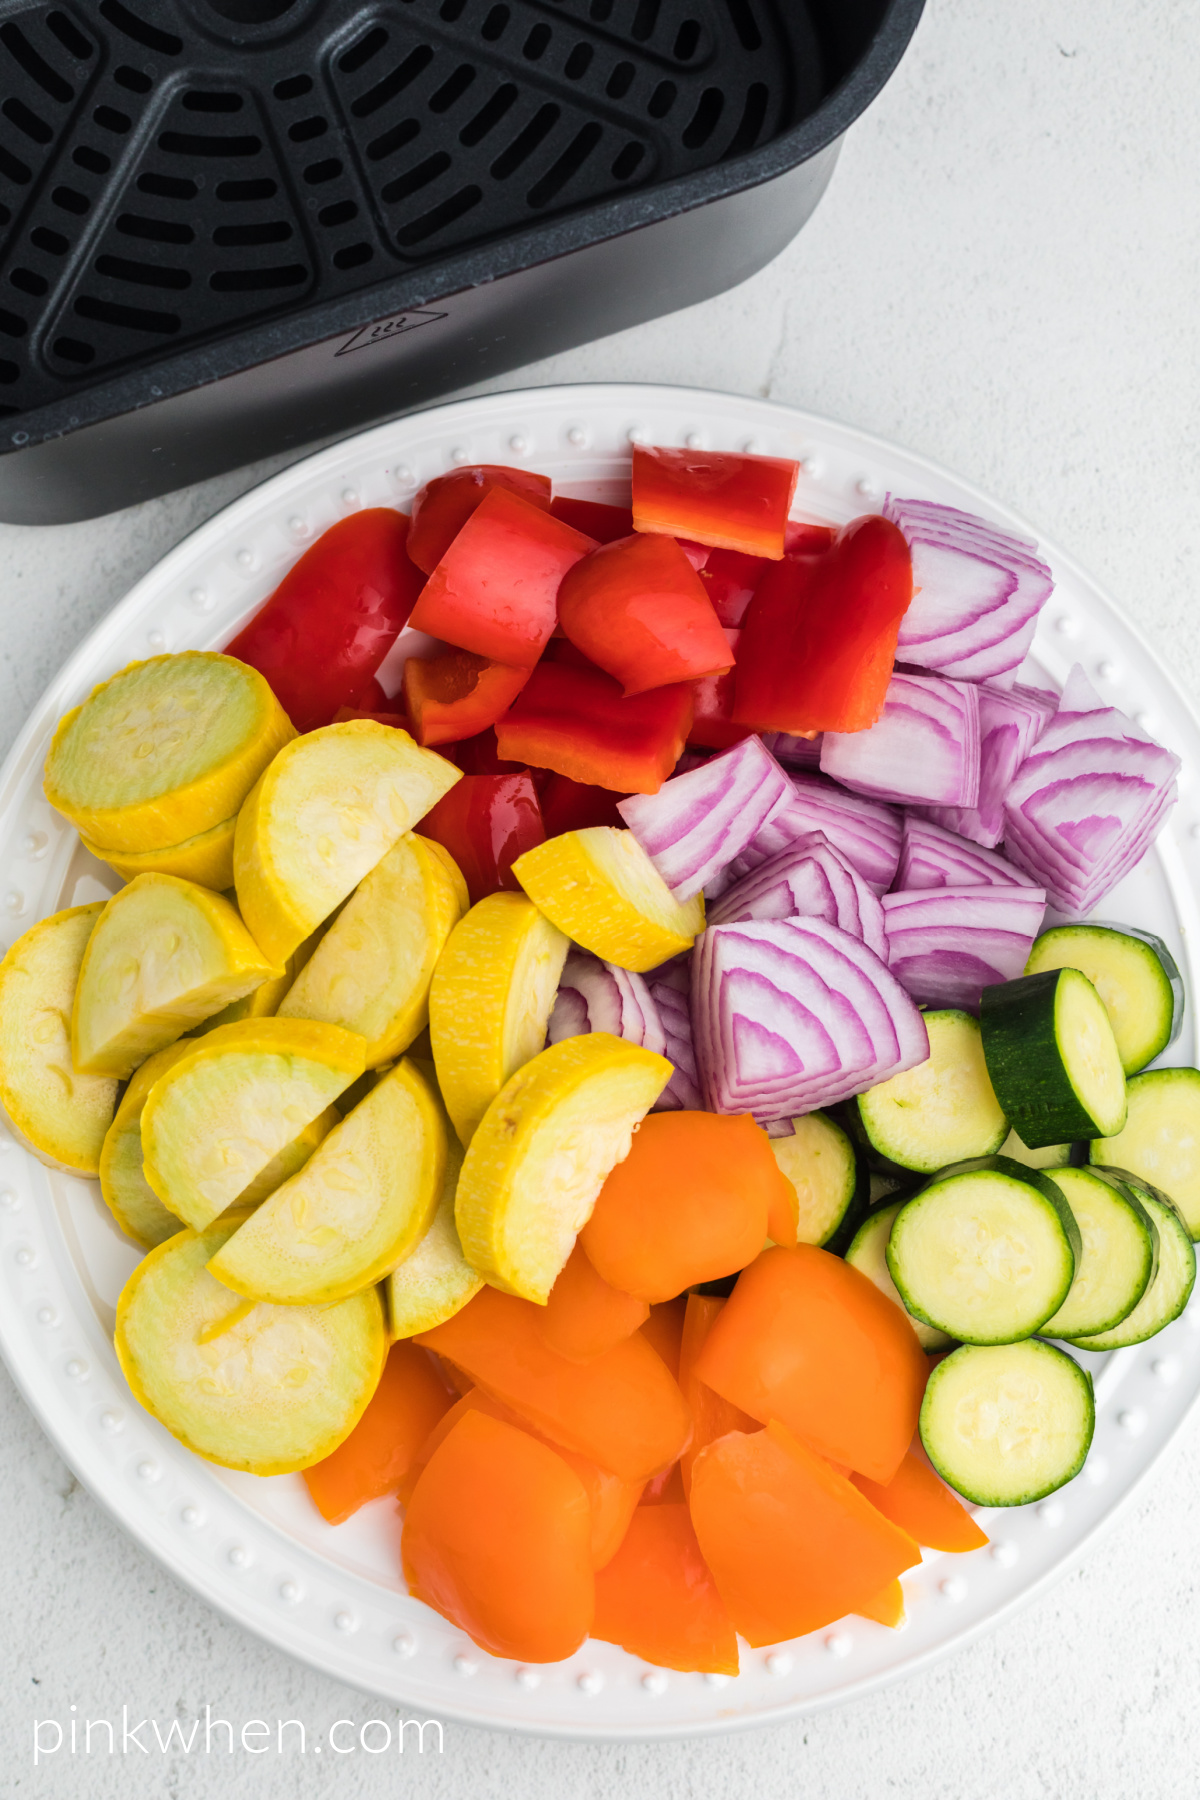 Vegetables sliced and on a plate.